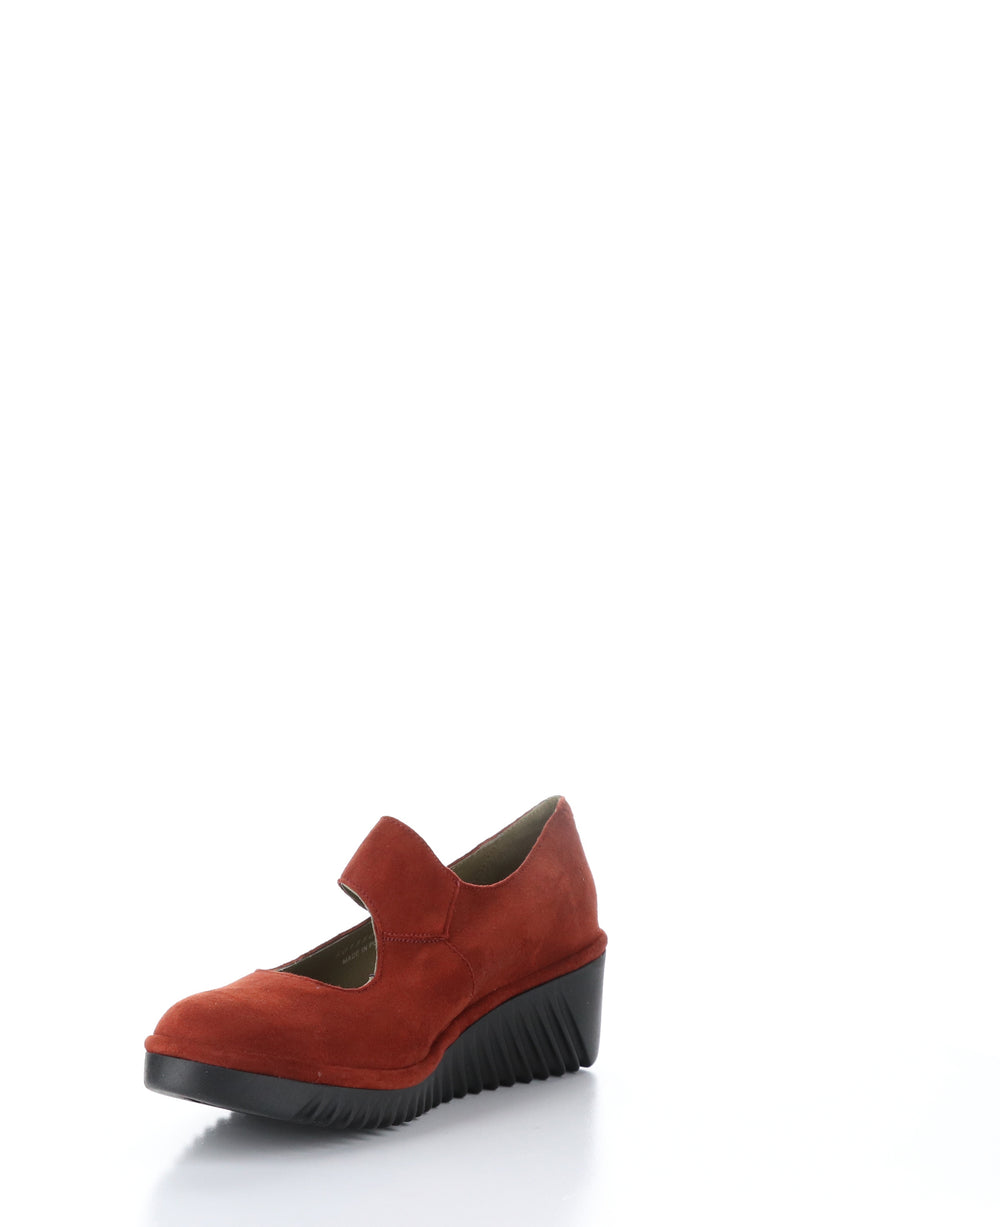 LYKA350FLY Red Round Toe Shoes